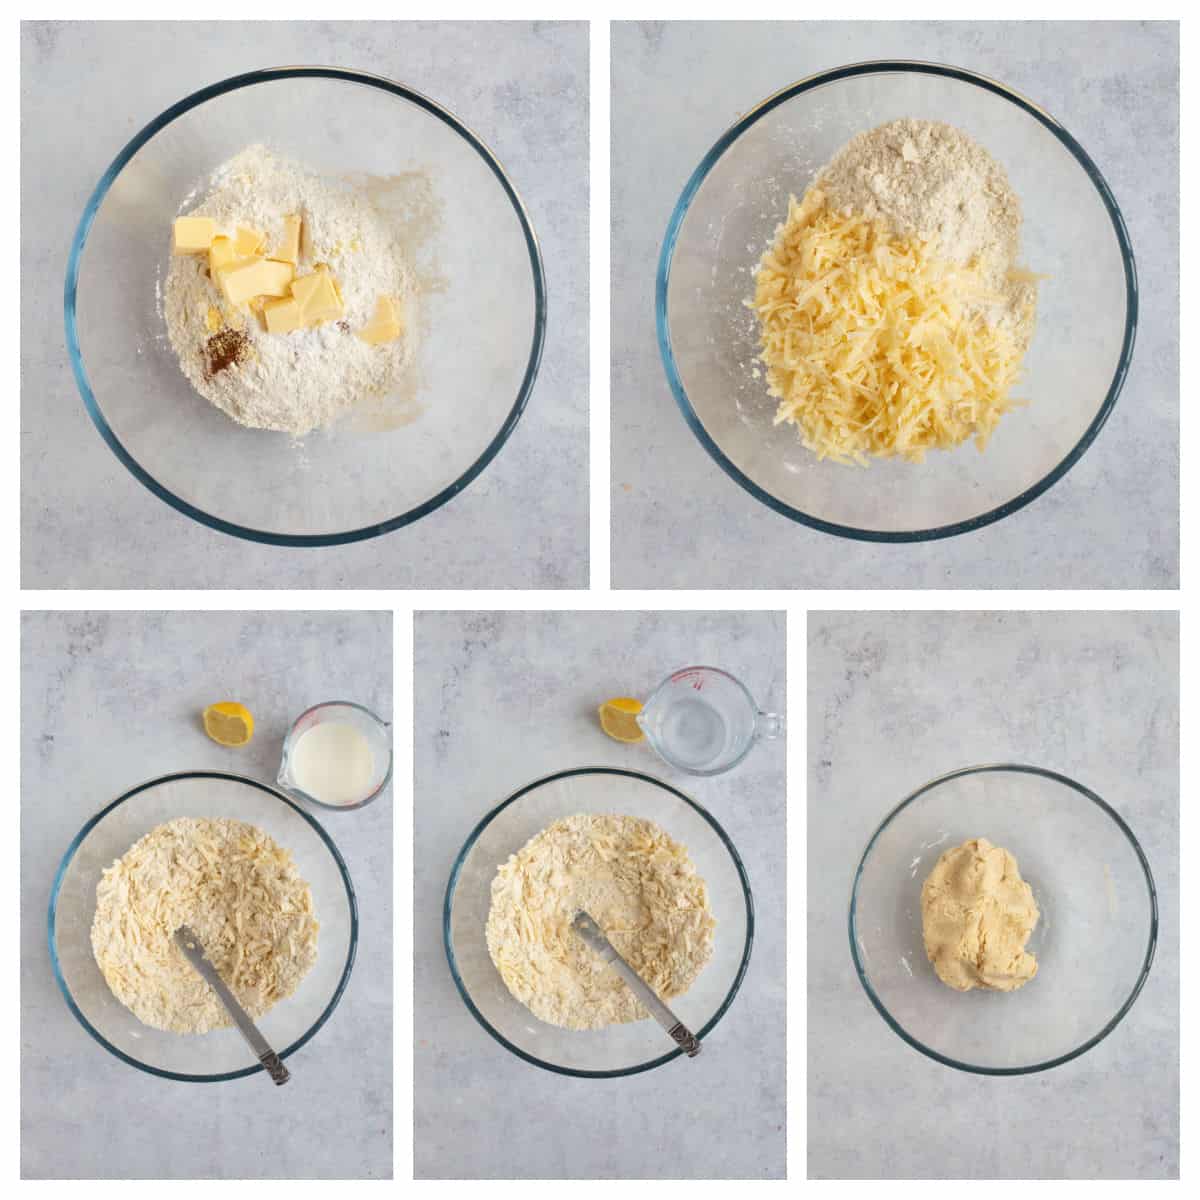 Scone dough in a mixing bowl.